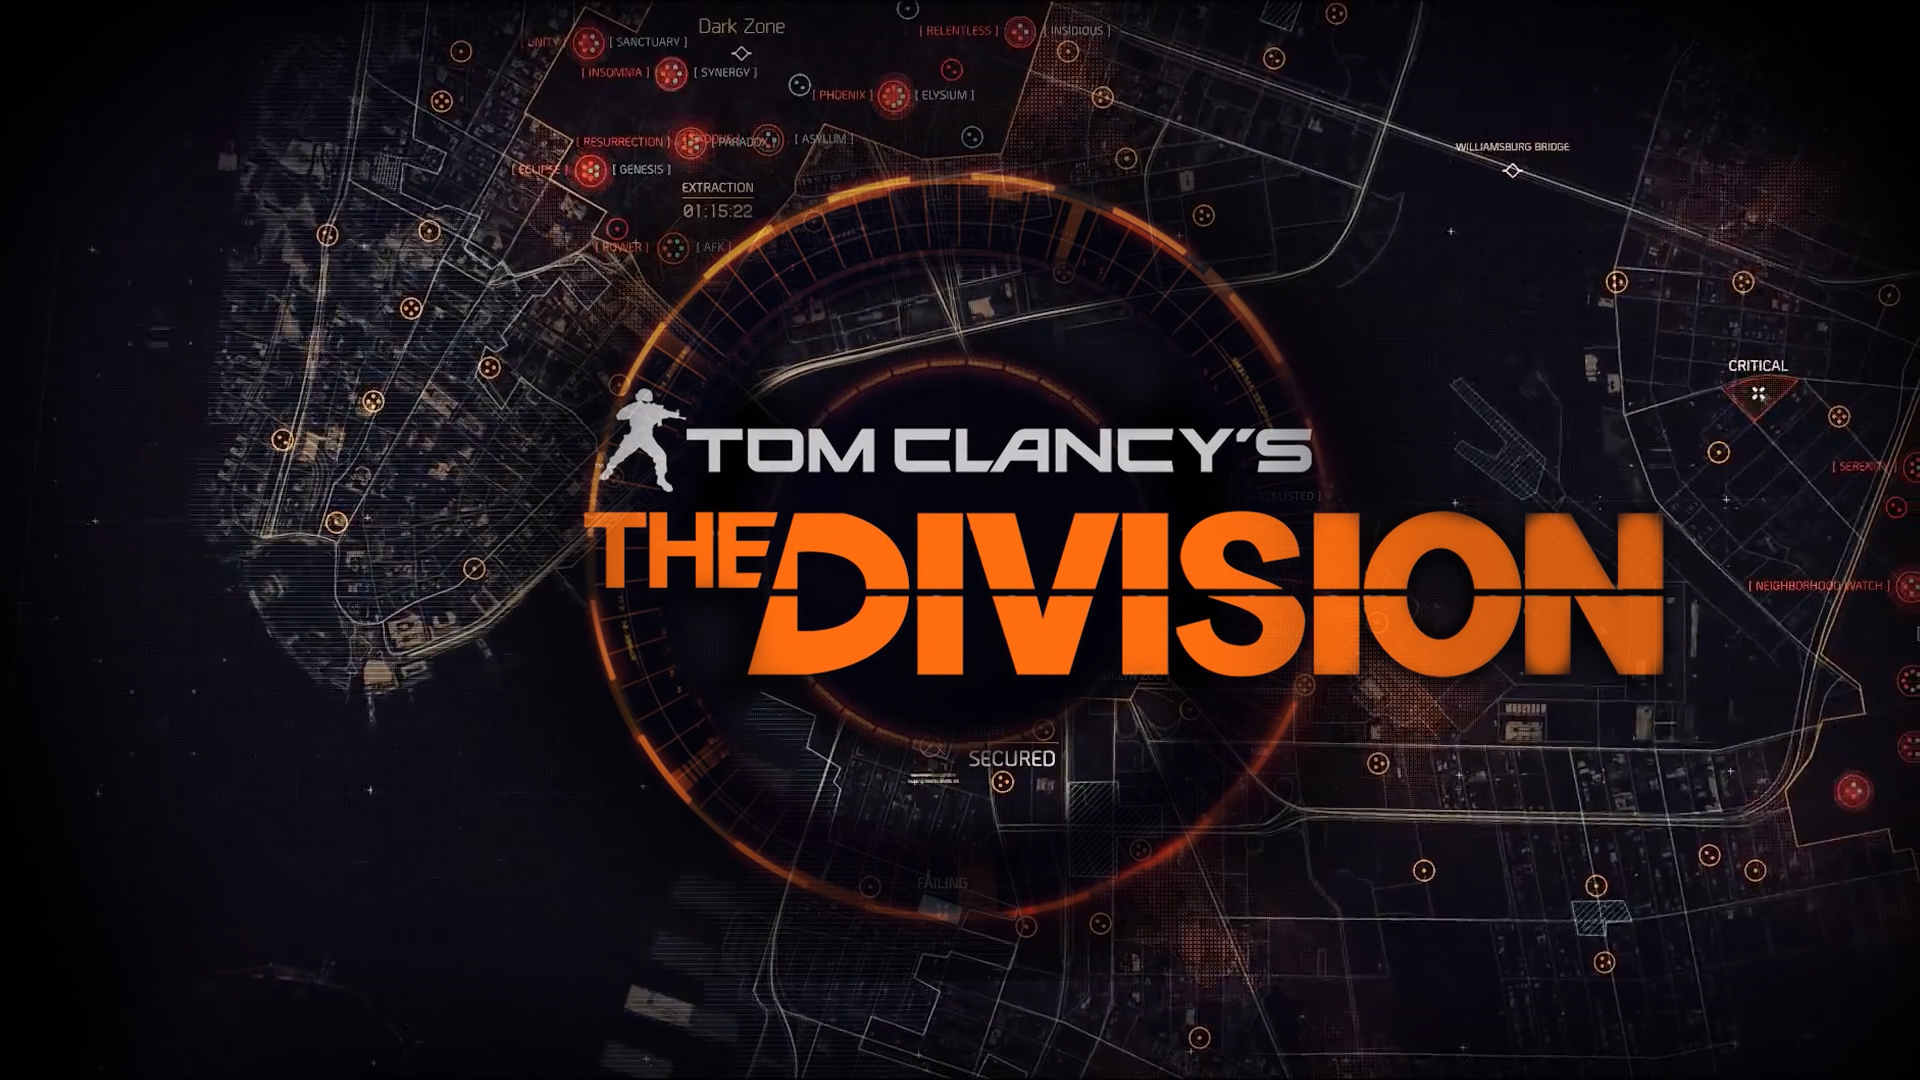 How to fix Error Delta 20010156 in Tom Clancy’s The Division?